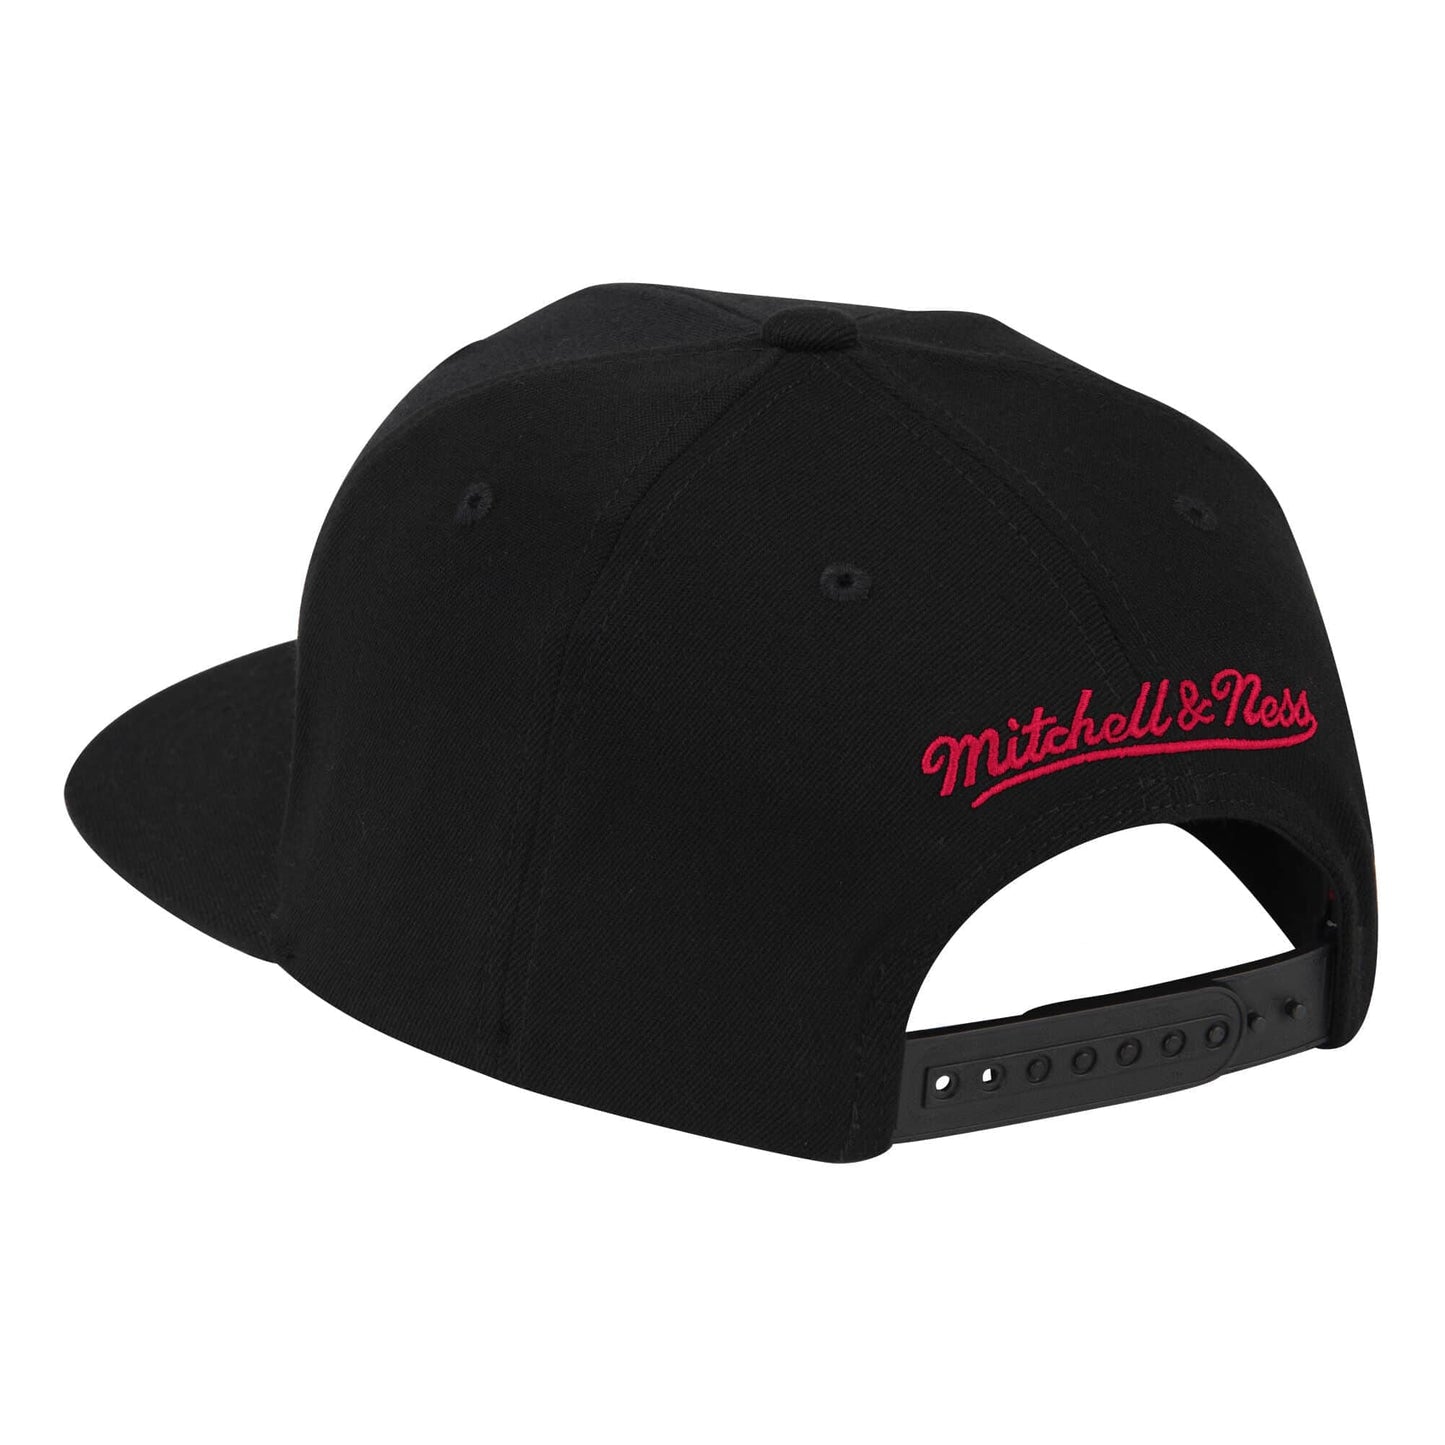 Mens NBA Toronto Raptors Downtime Classic Black Snapback Hat By Mitchell And Ness